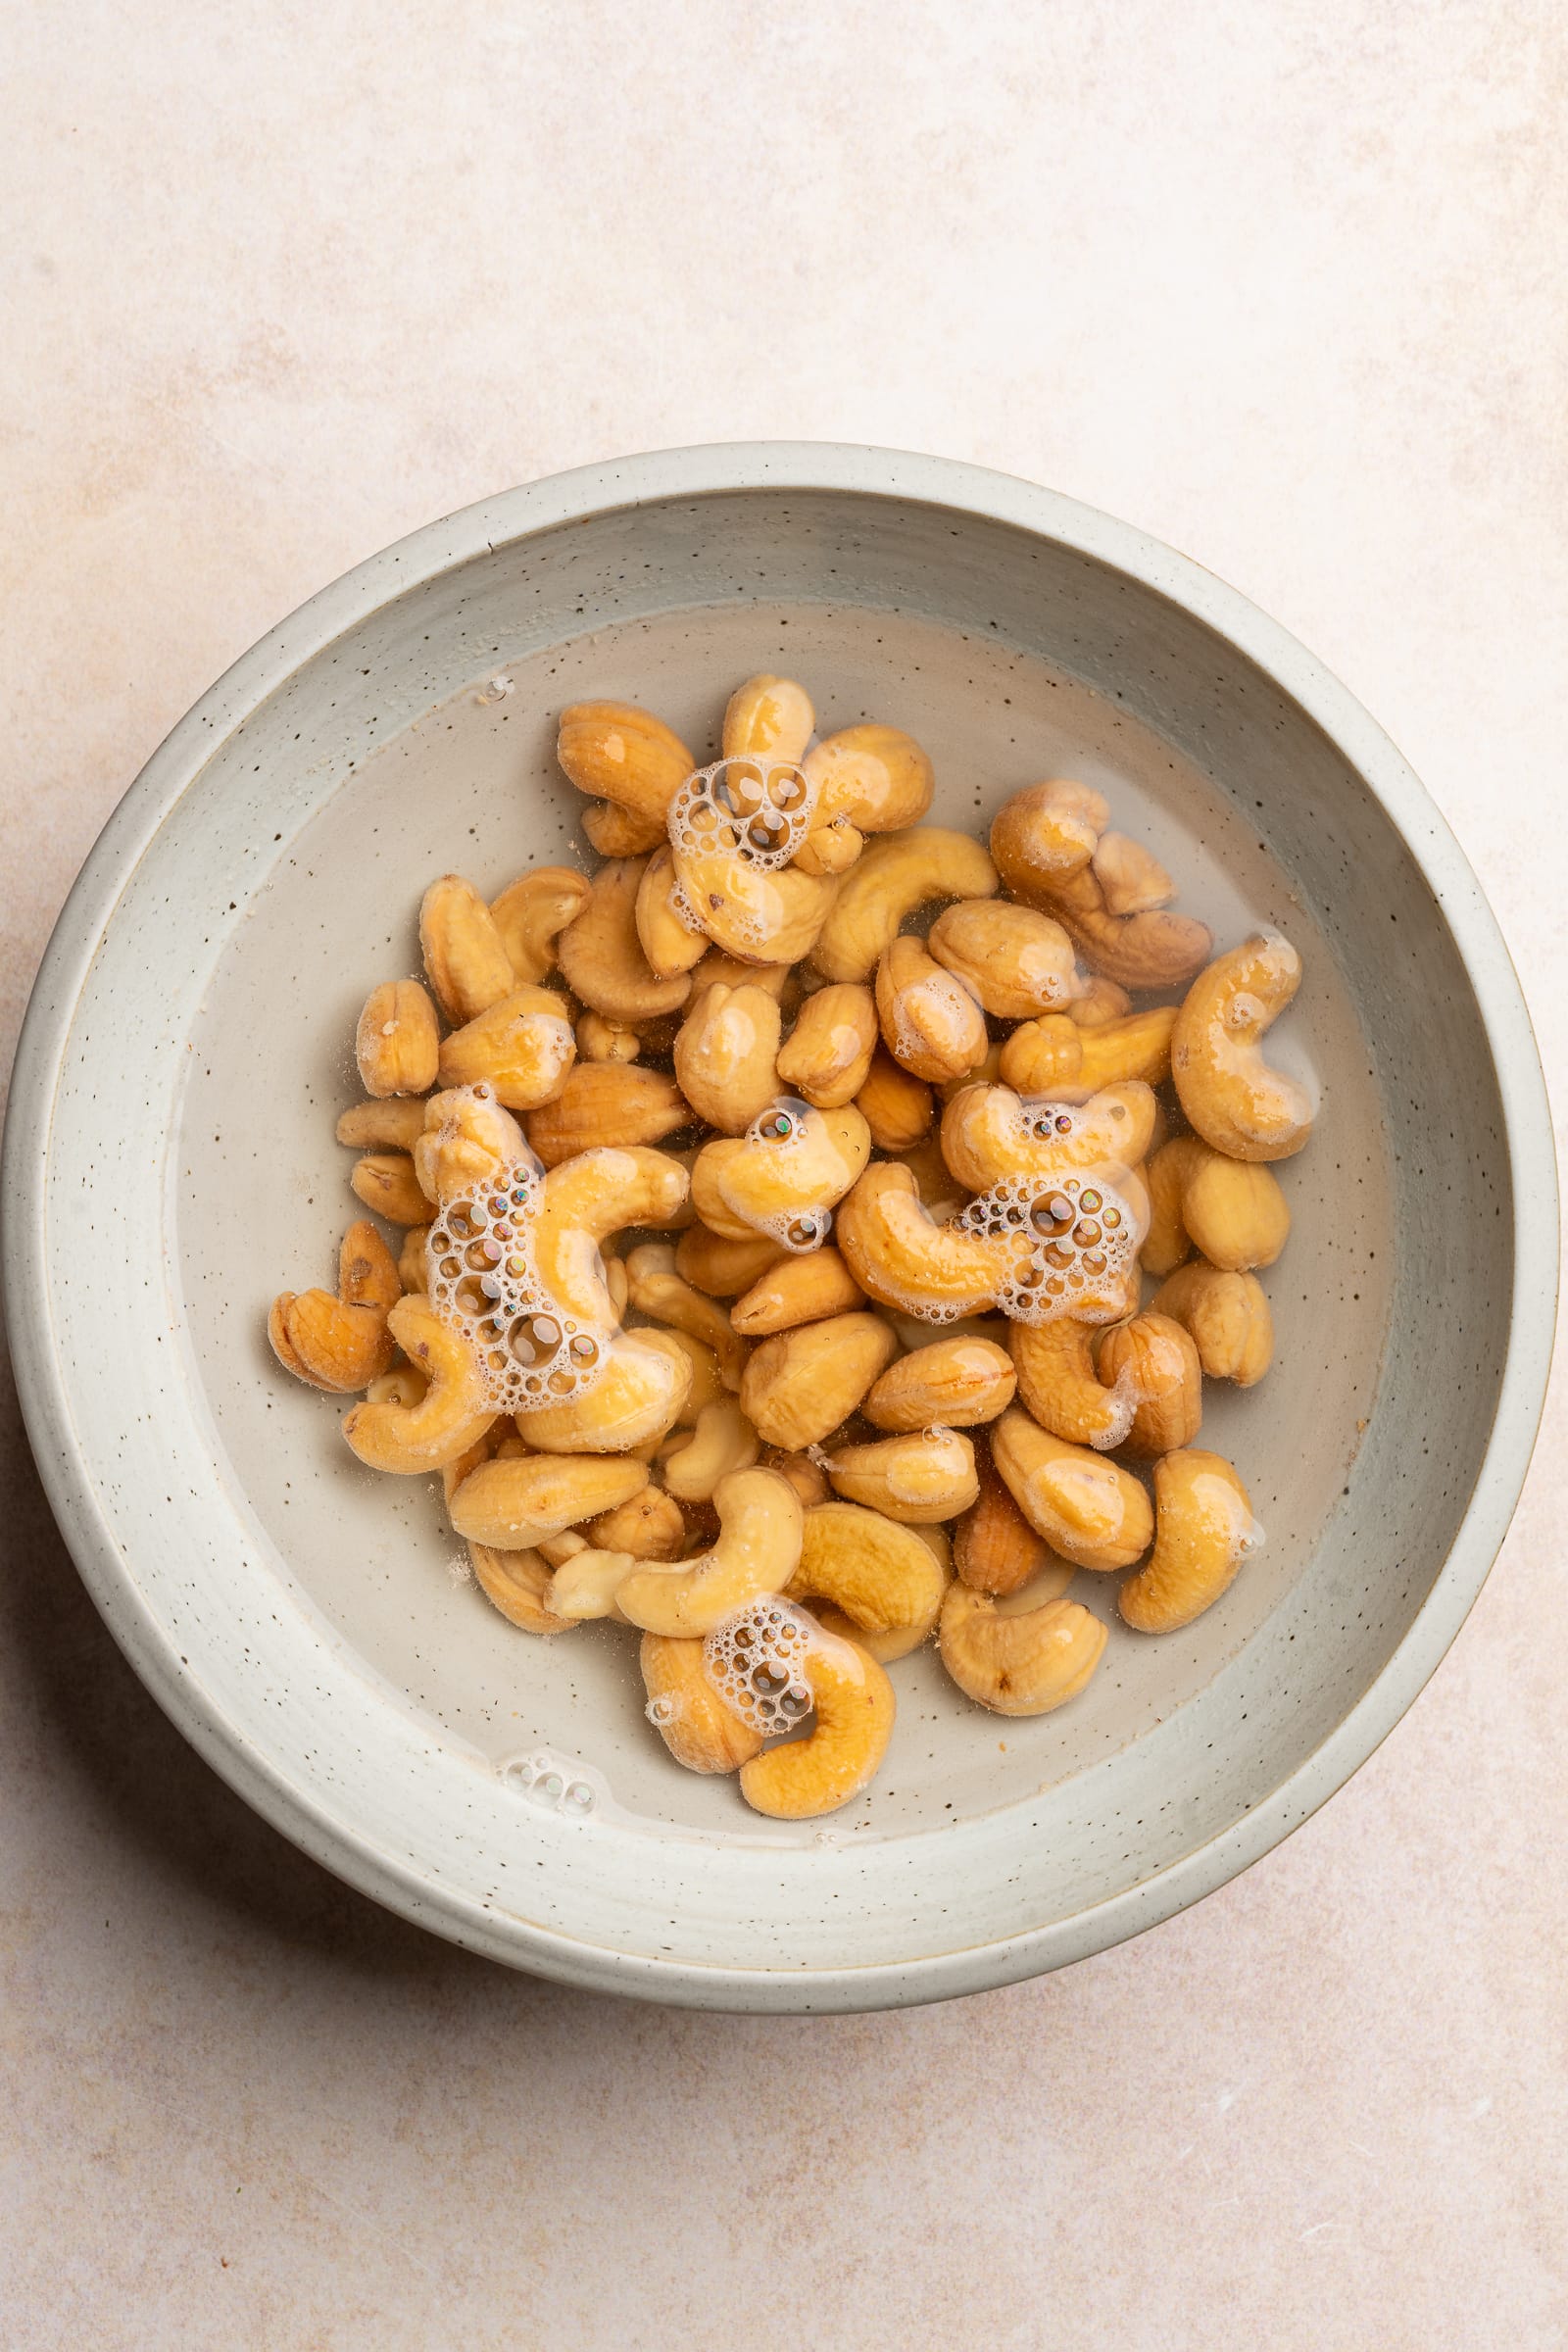 Cashews in a bowl of water.